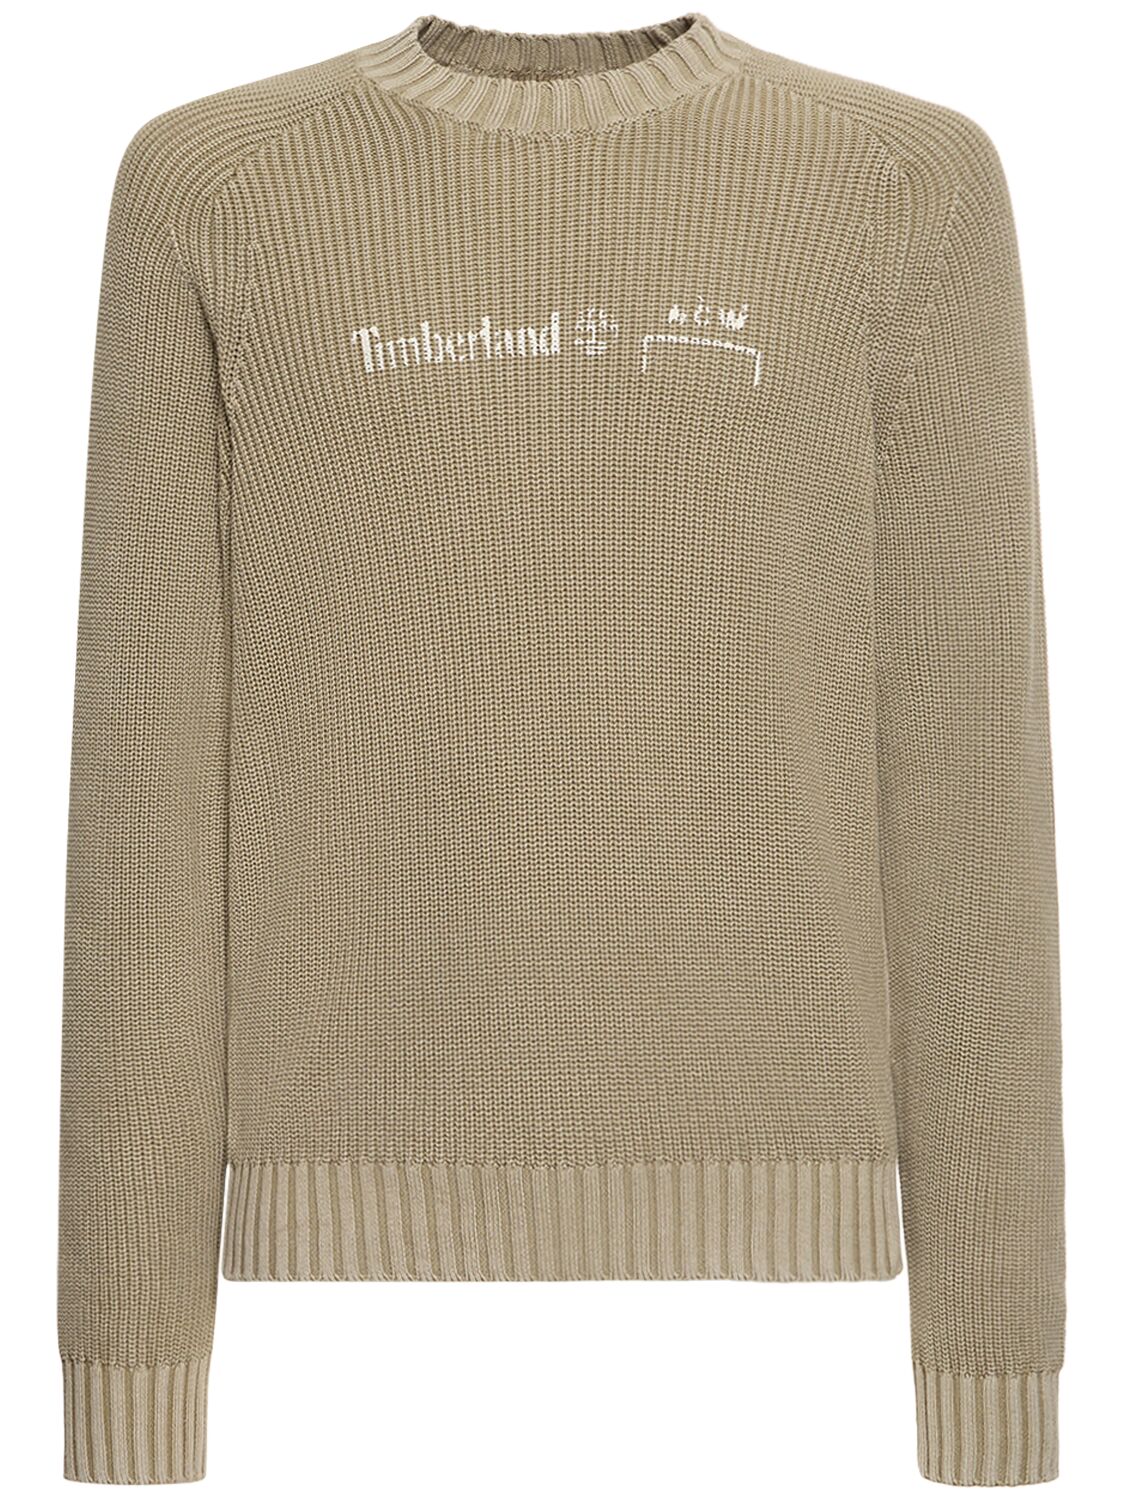 A-cold-wall* X Timberland Knit Sweater – MEN > CLOTHING > KNITWEAR